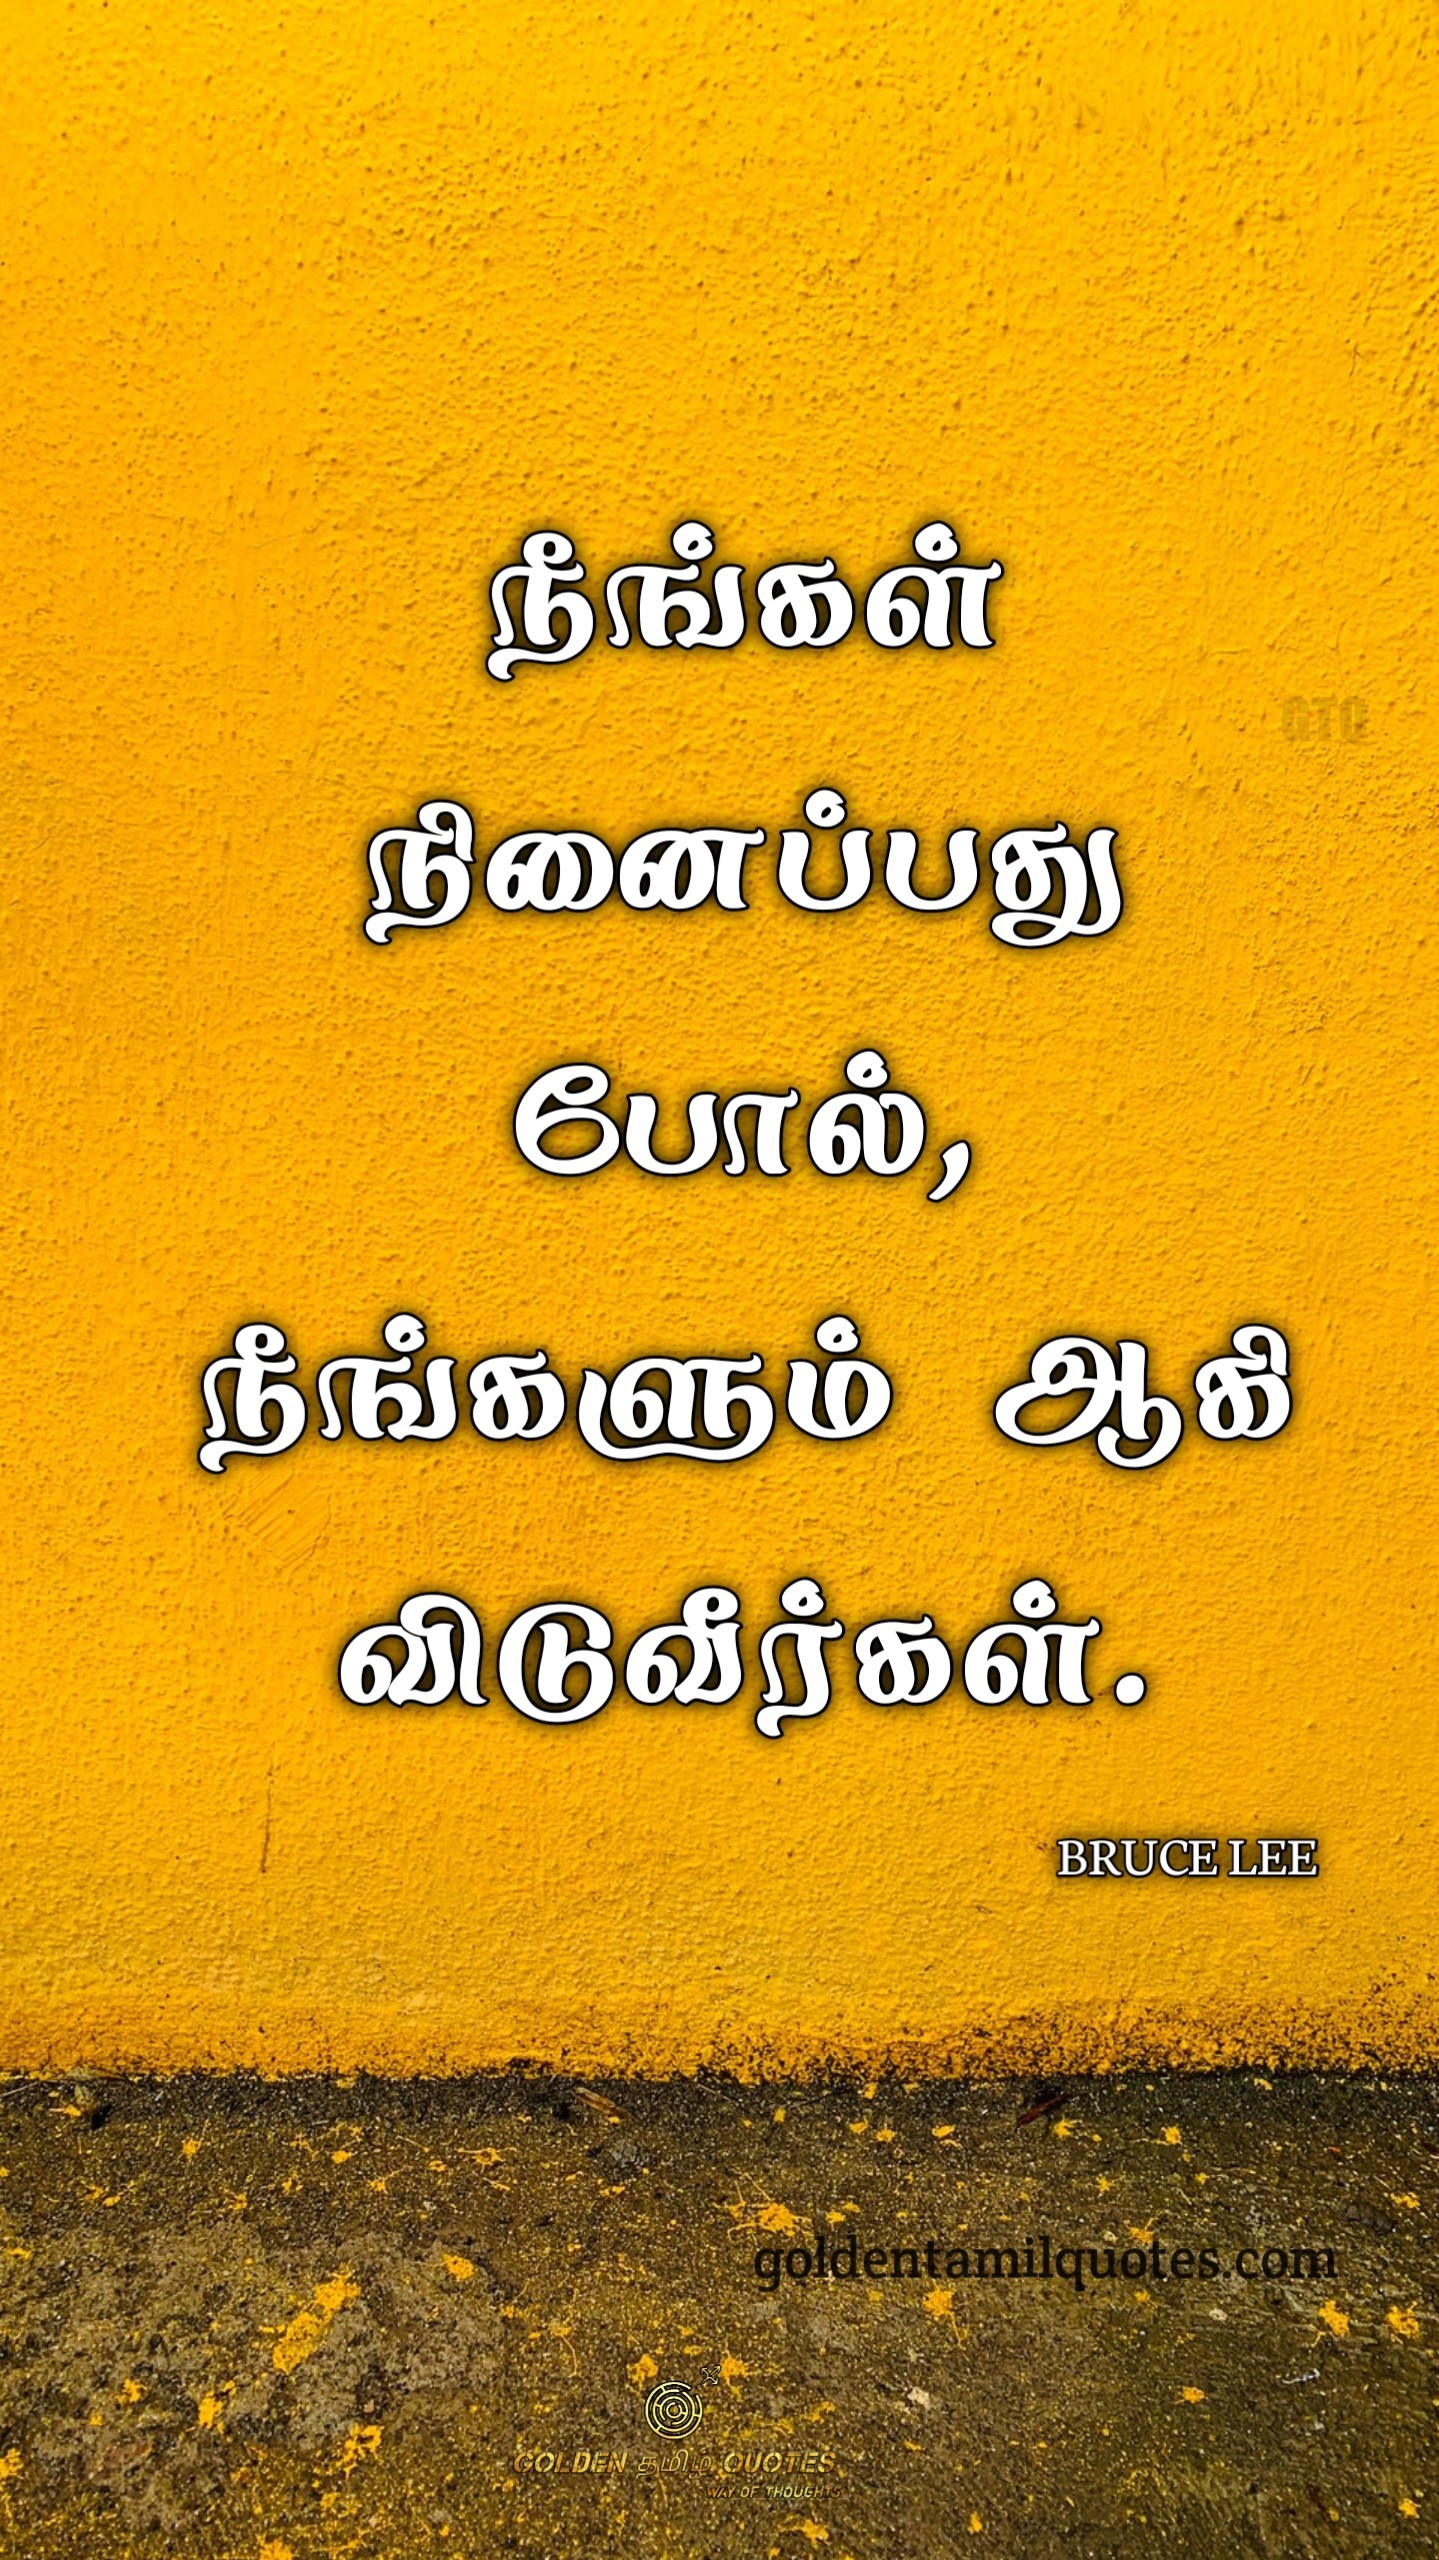 29-GREAT BRUCE LEE QUOTES IN TAMIL » GOLDEN TAMIL QUOTES HD WALLPAPER